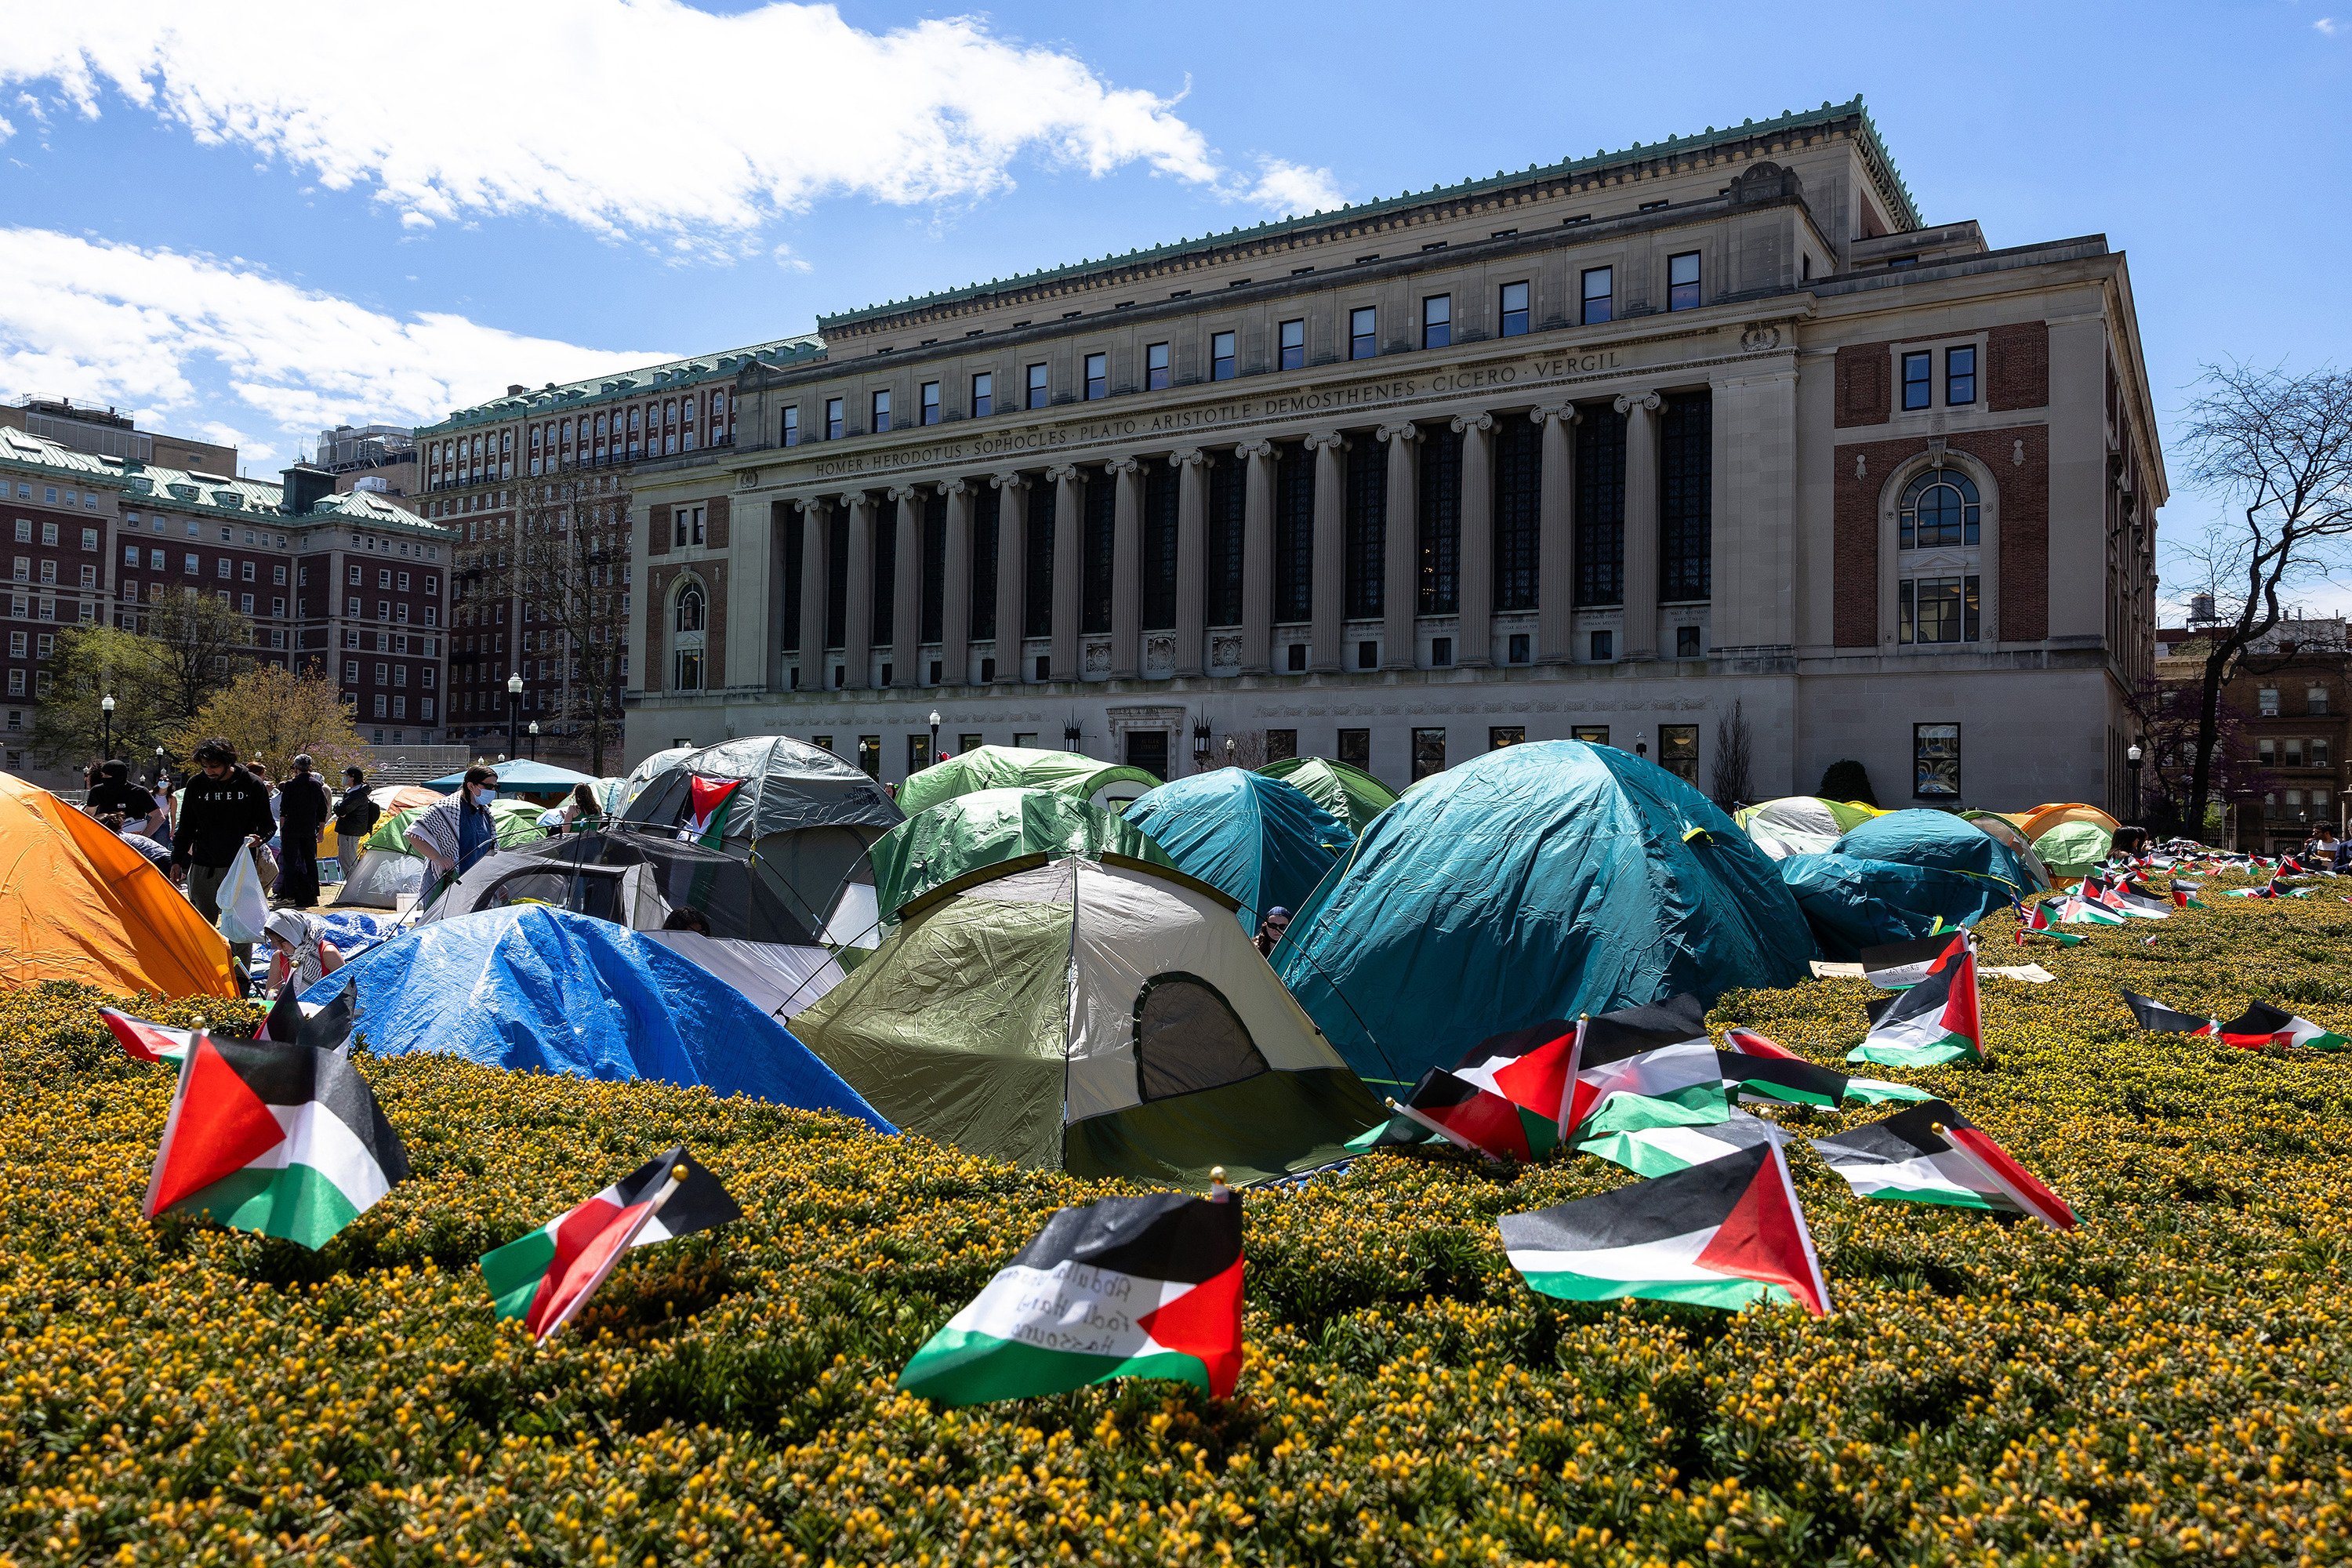 Student demonstrators occupy the pro-Palestinian "Gaza Solidarity Encampment" on the West Lawn of Columbia University on April 24, in New York City.